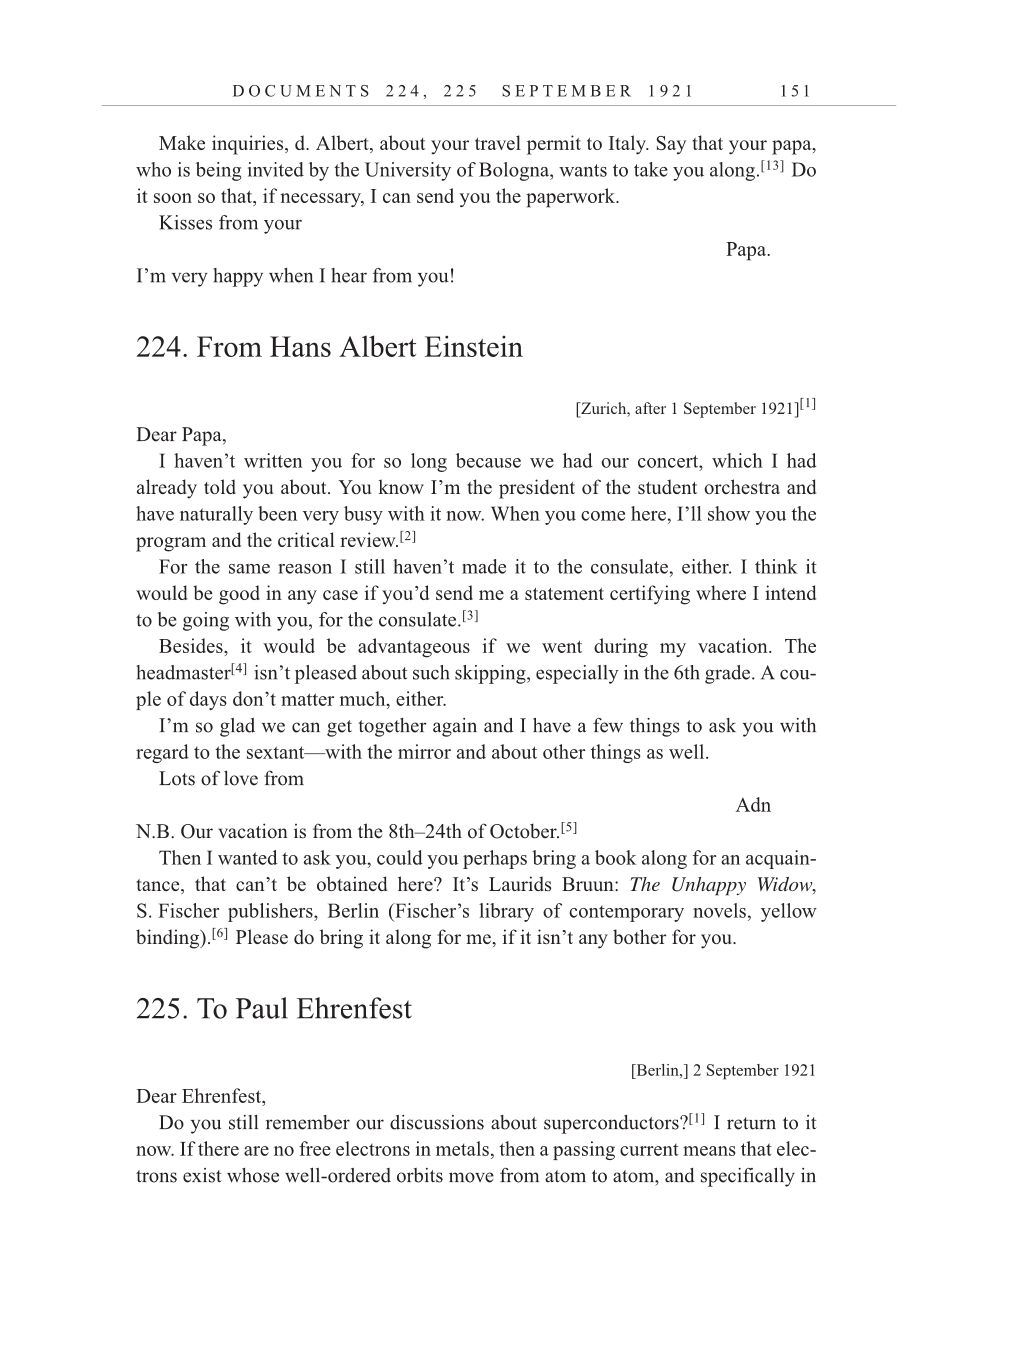 Volume 12: The Berlin Years: Correspondence, January-December 1921 (English translation supplement) page 151